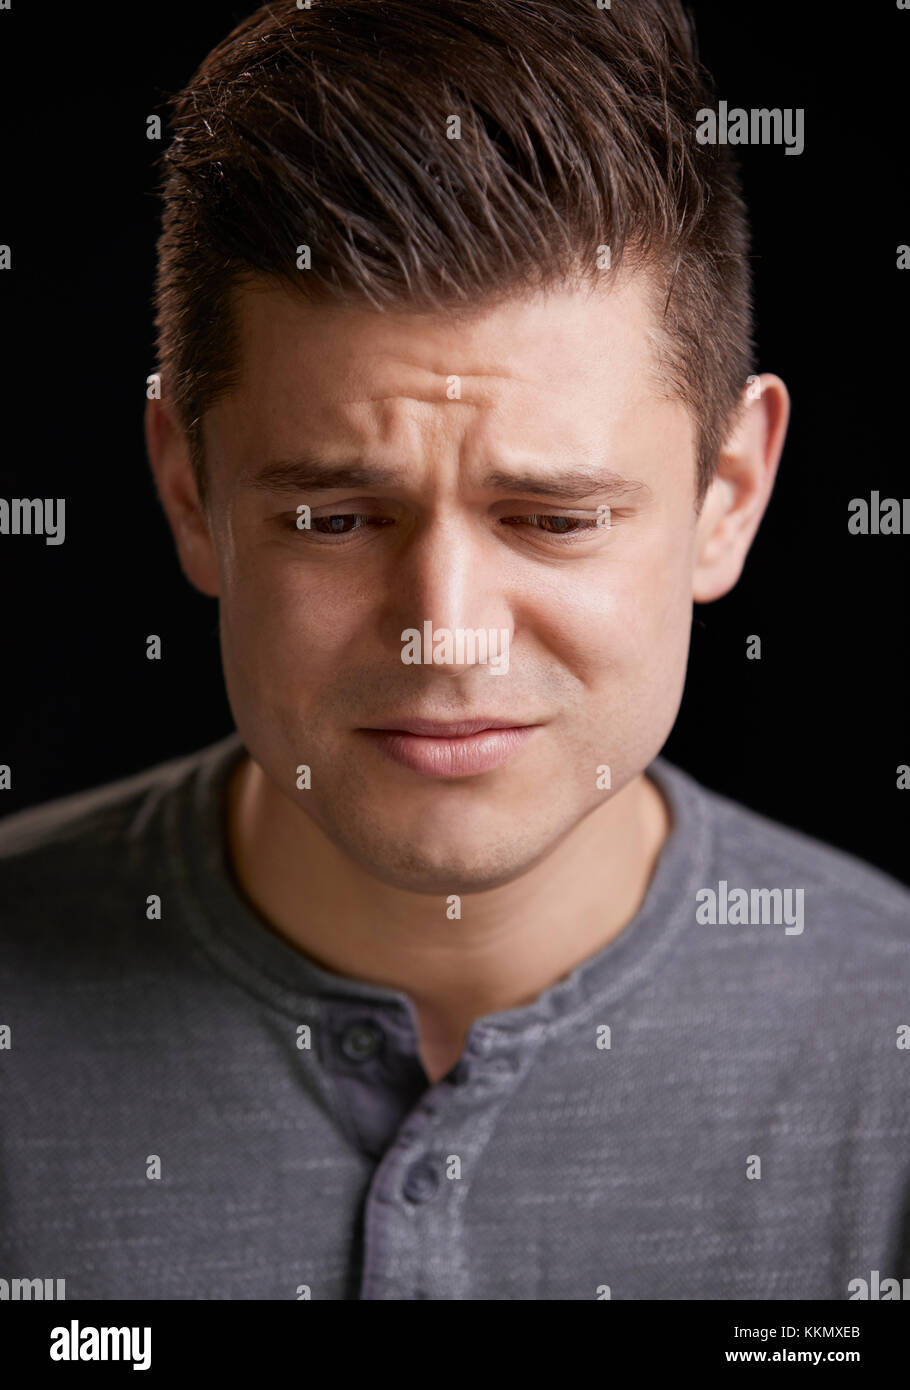 Worried young white man looking down, vertical portrait Stock Photo